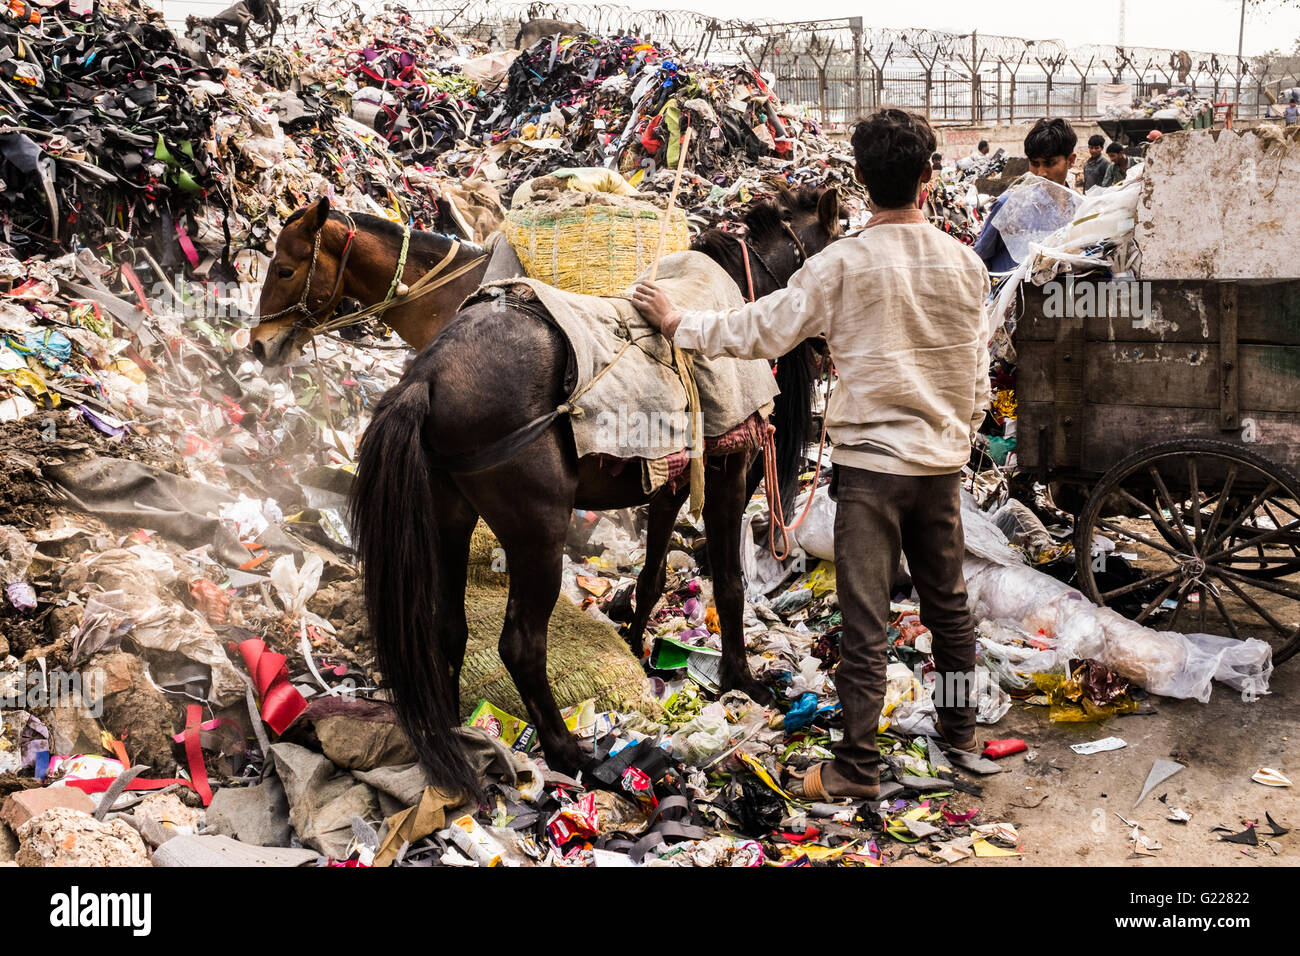 Young workers with horses sorting out rubbish at dump in Delhi, India. Stock Photo